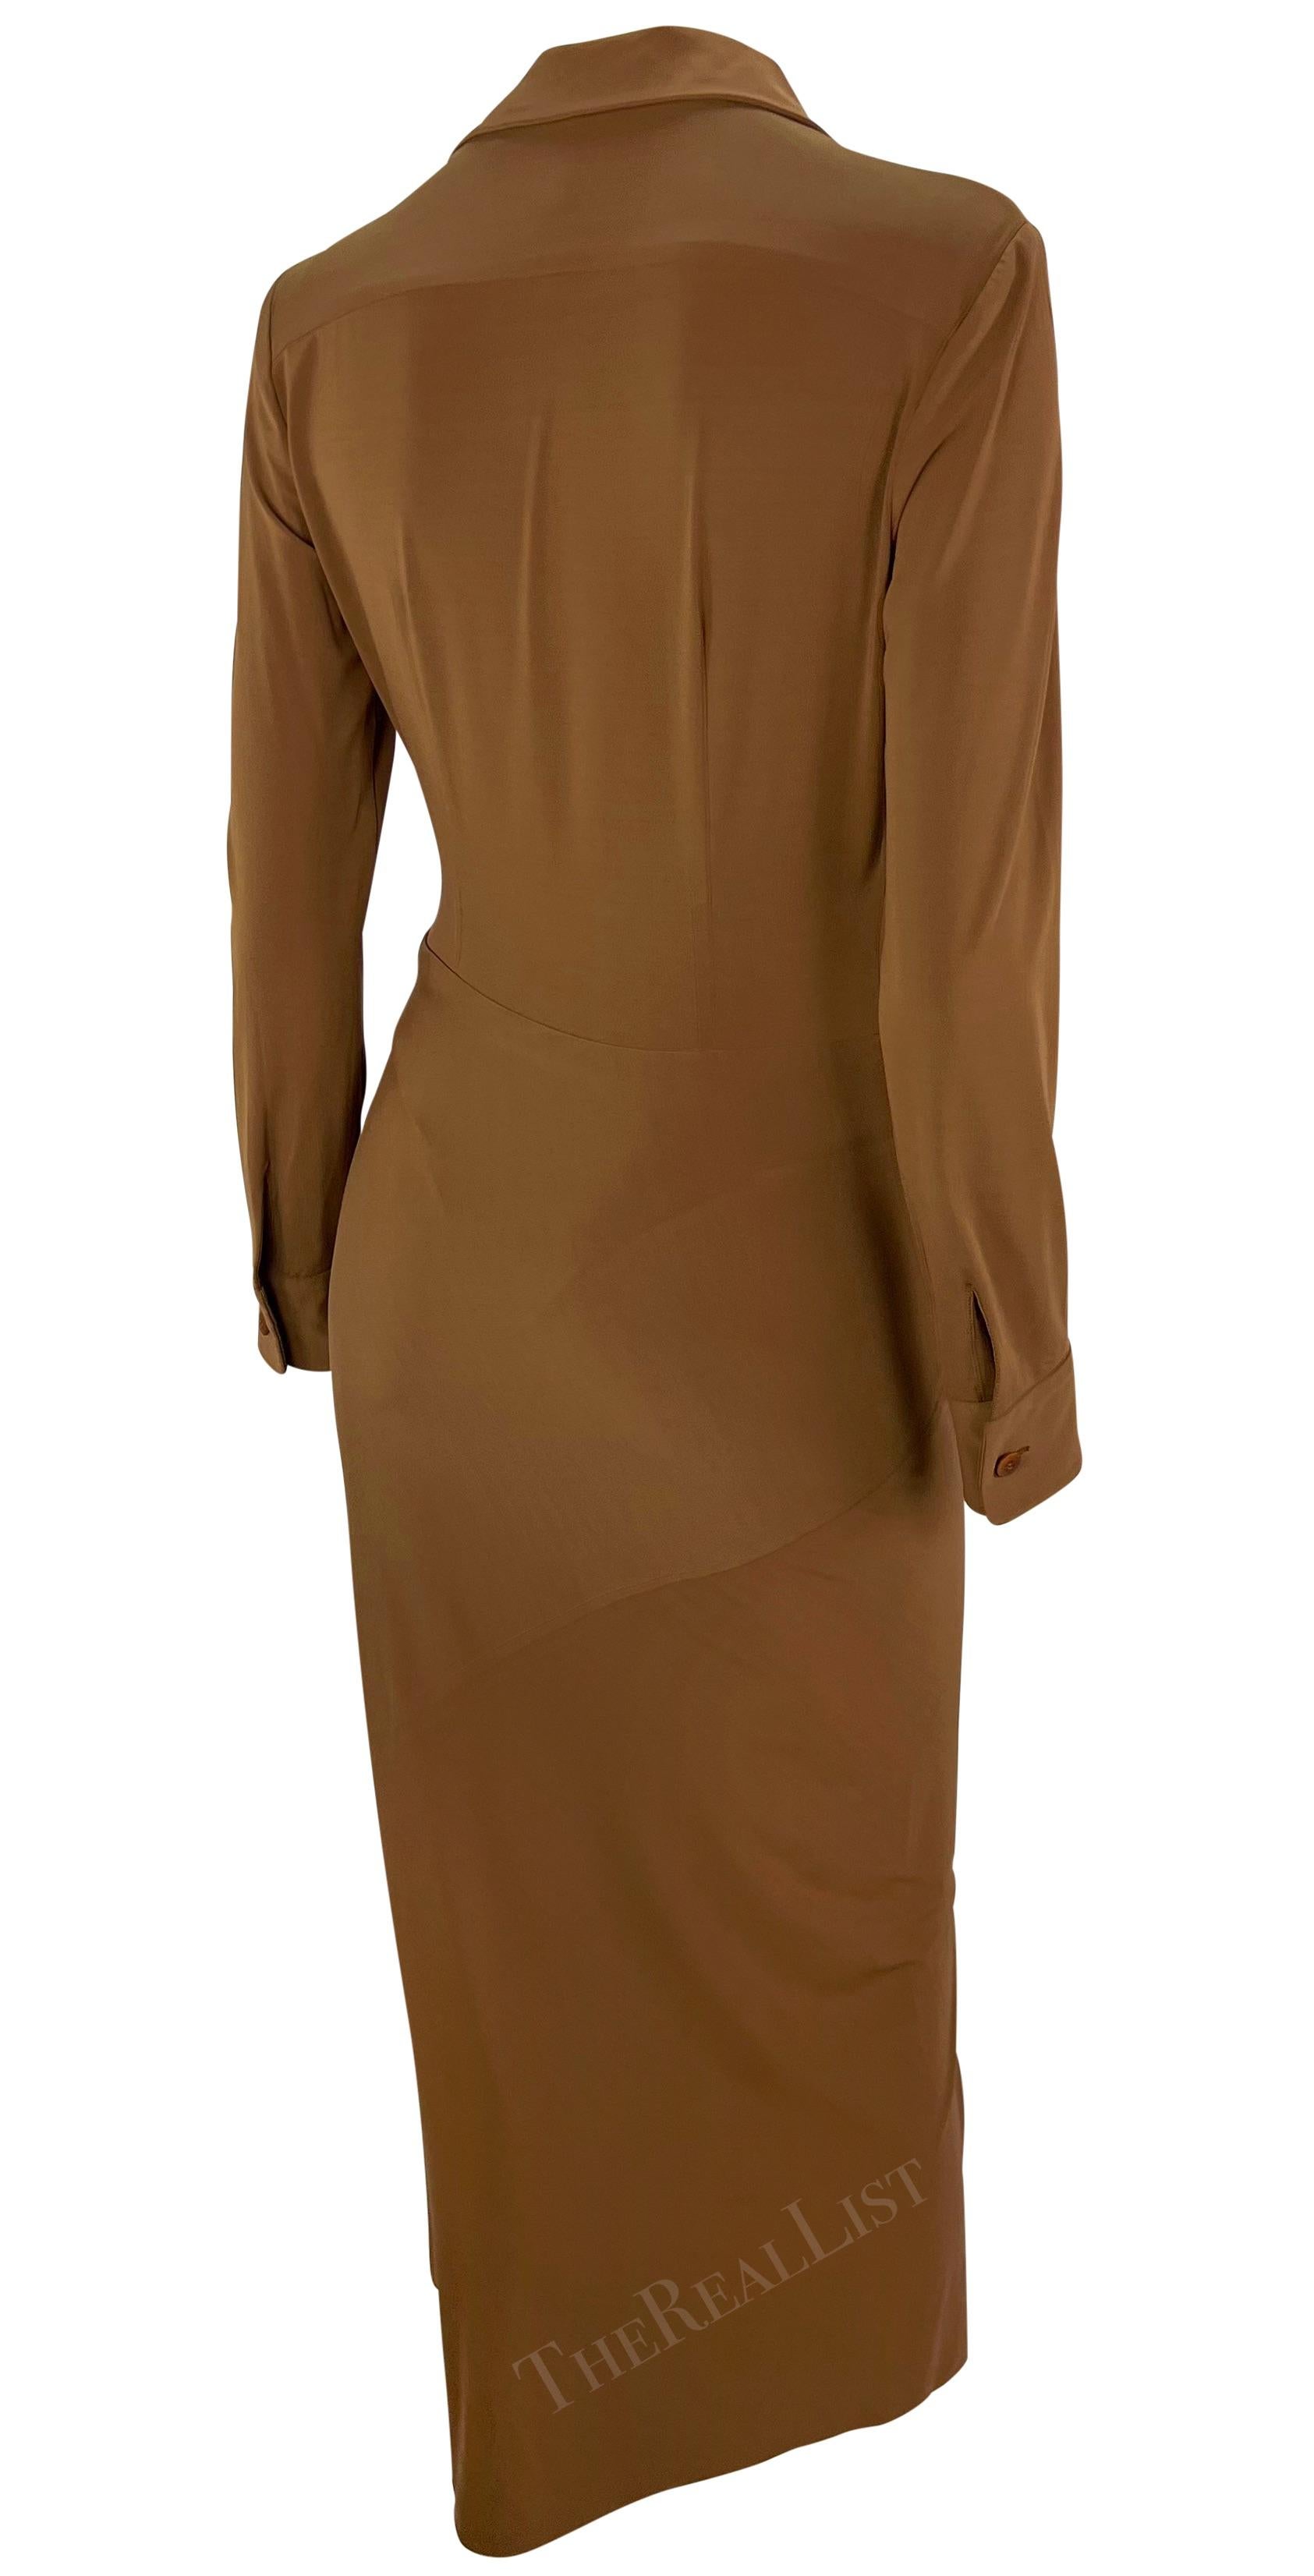 S/S 1996 Donna Karan Runway Light Brown Plunging Bodycon Dress For Sale 5